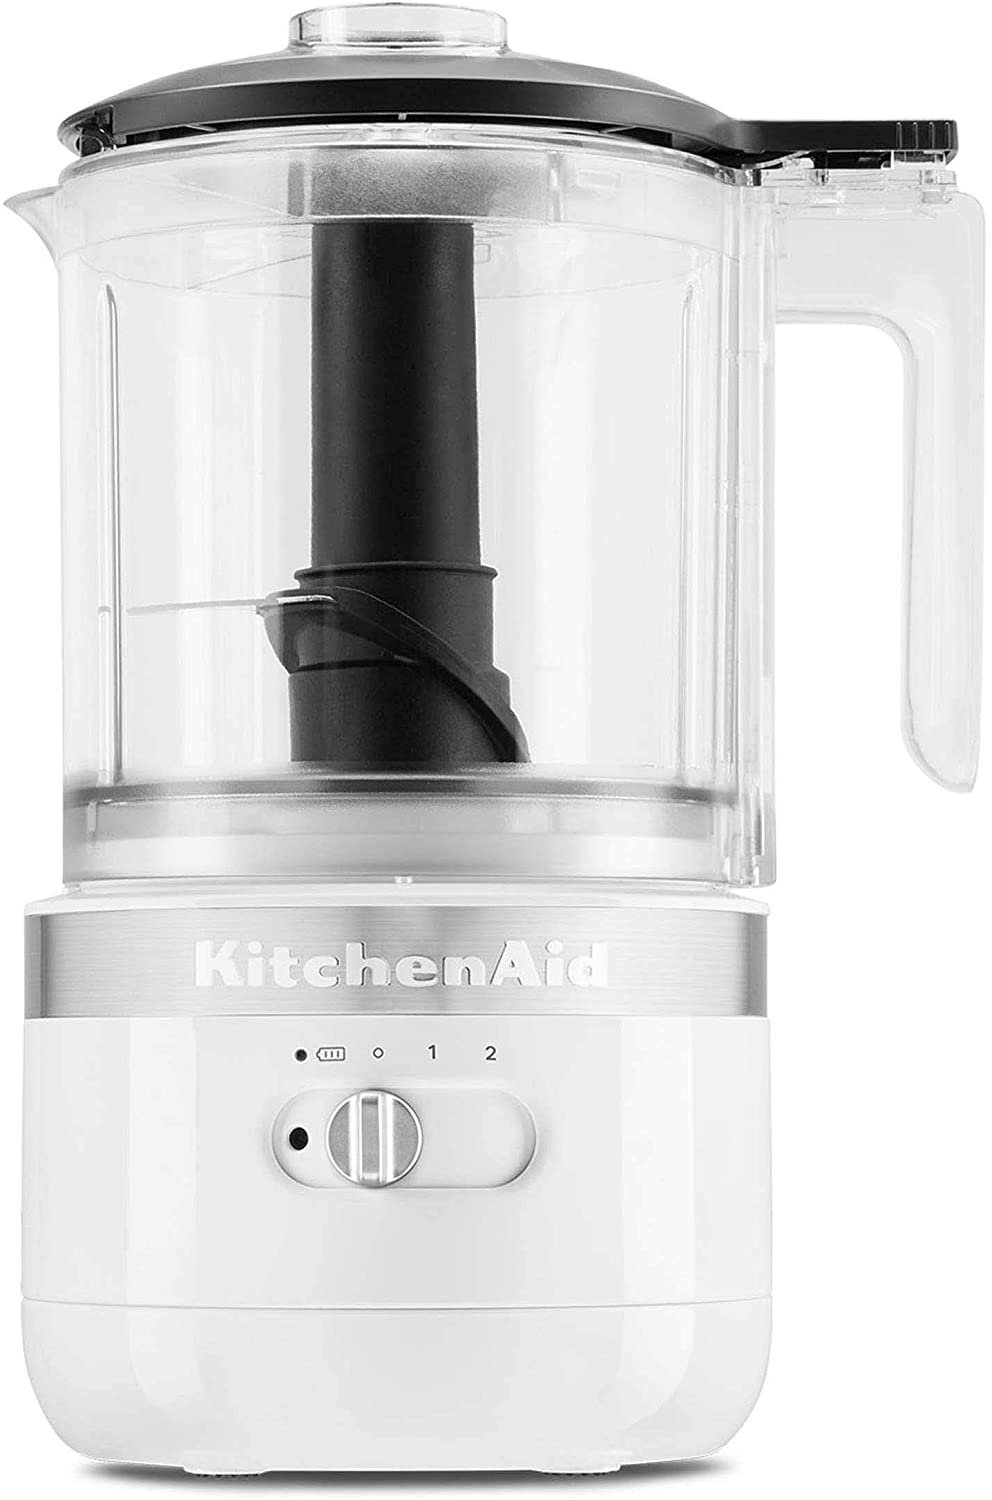 KitchenAid 5 Cup Cordless Food Chopper in shade Black on table surrounded by food